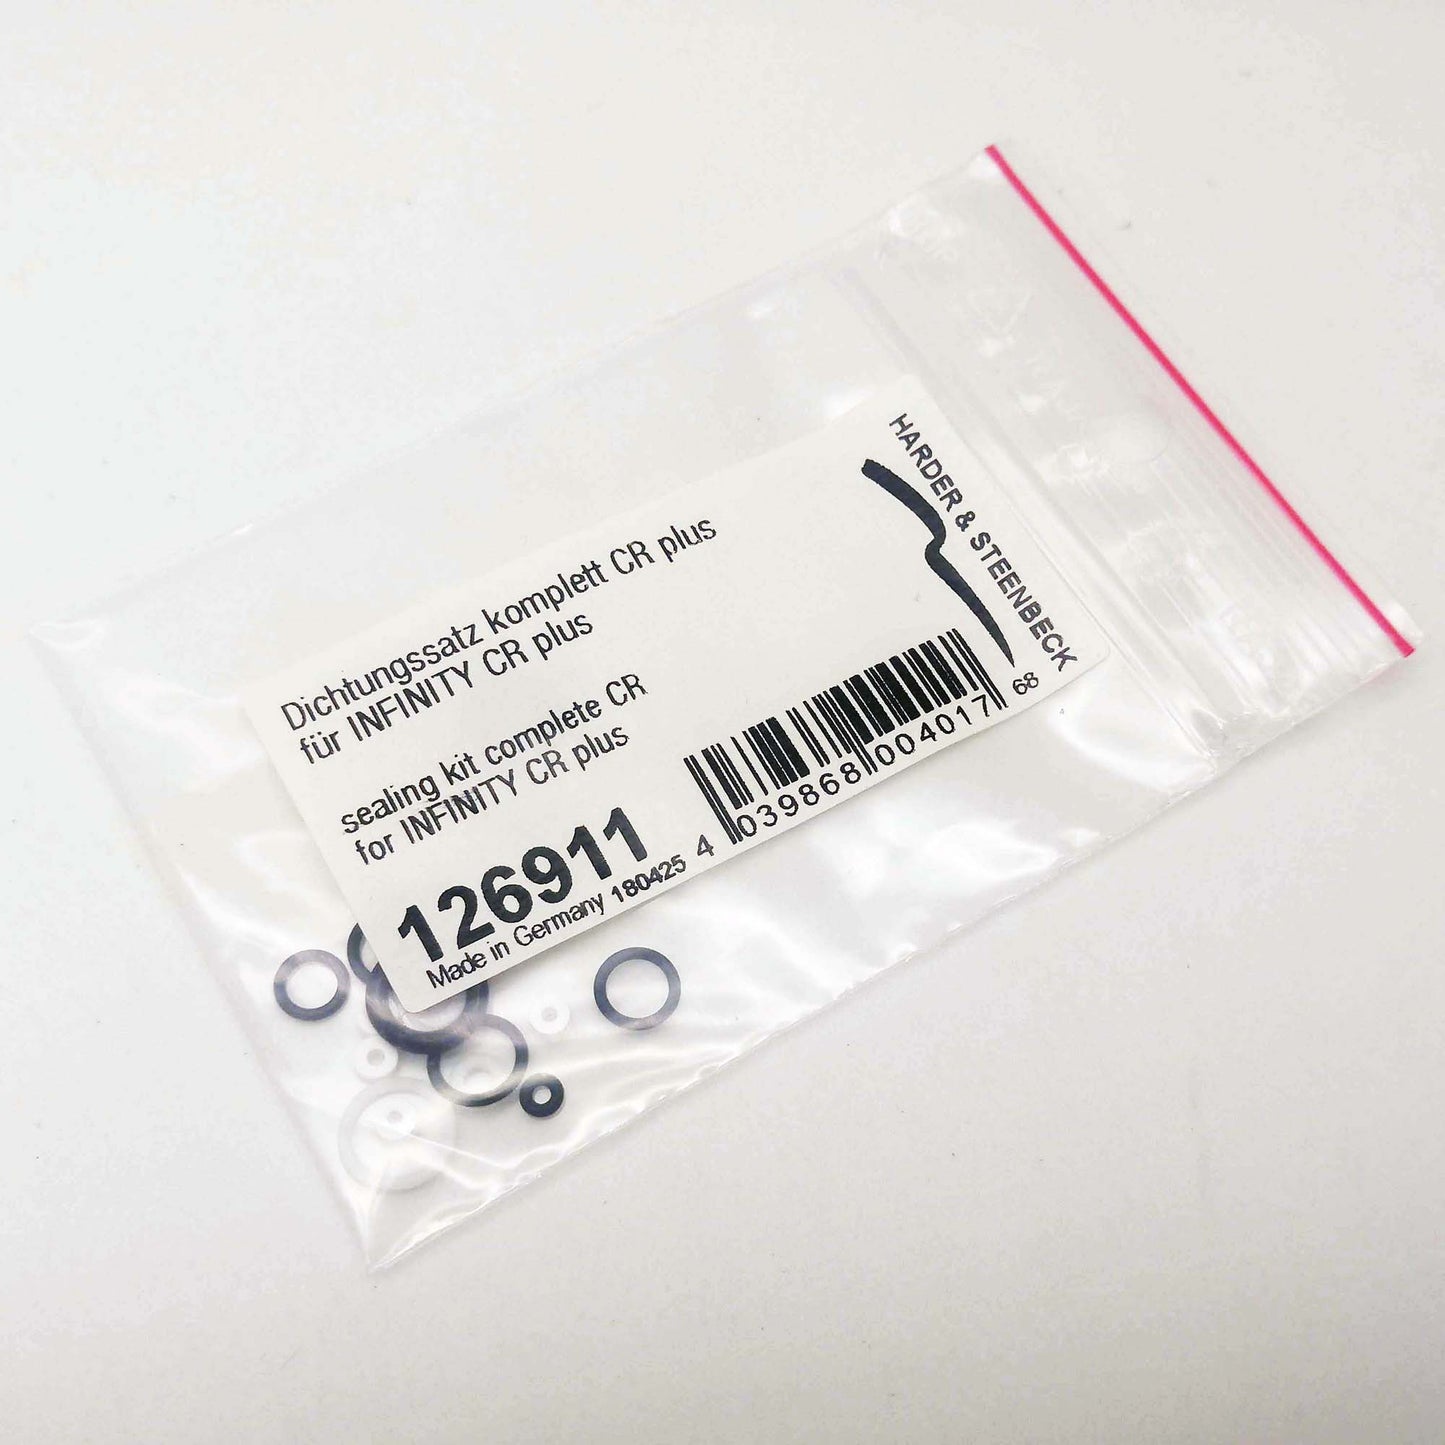 Harder & Steenbeck Sealing Kit for Infinity CR Plus (126911)